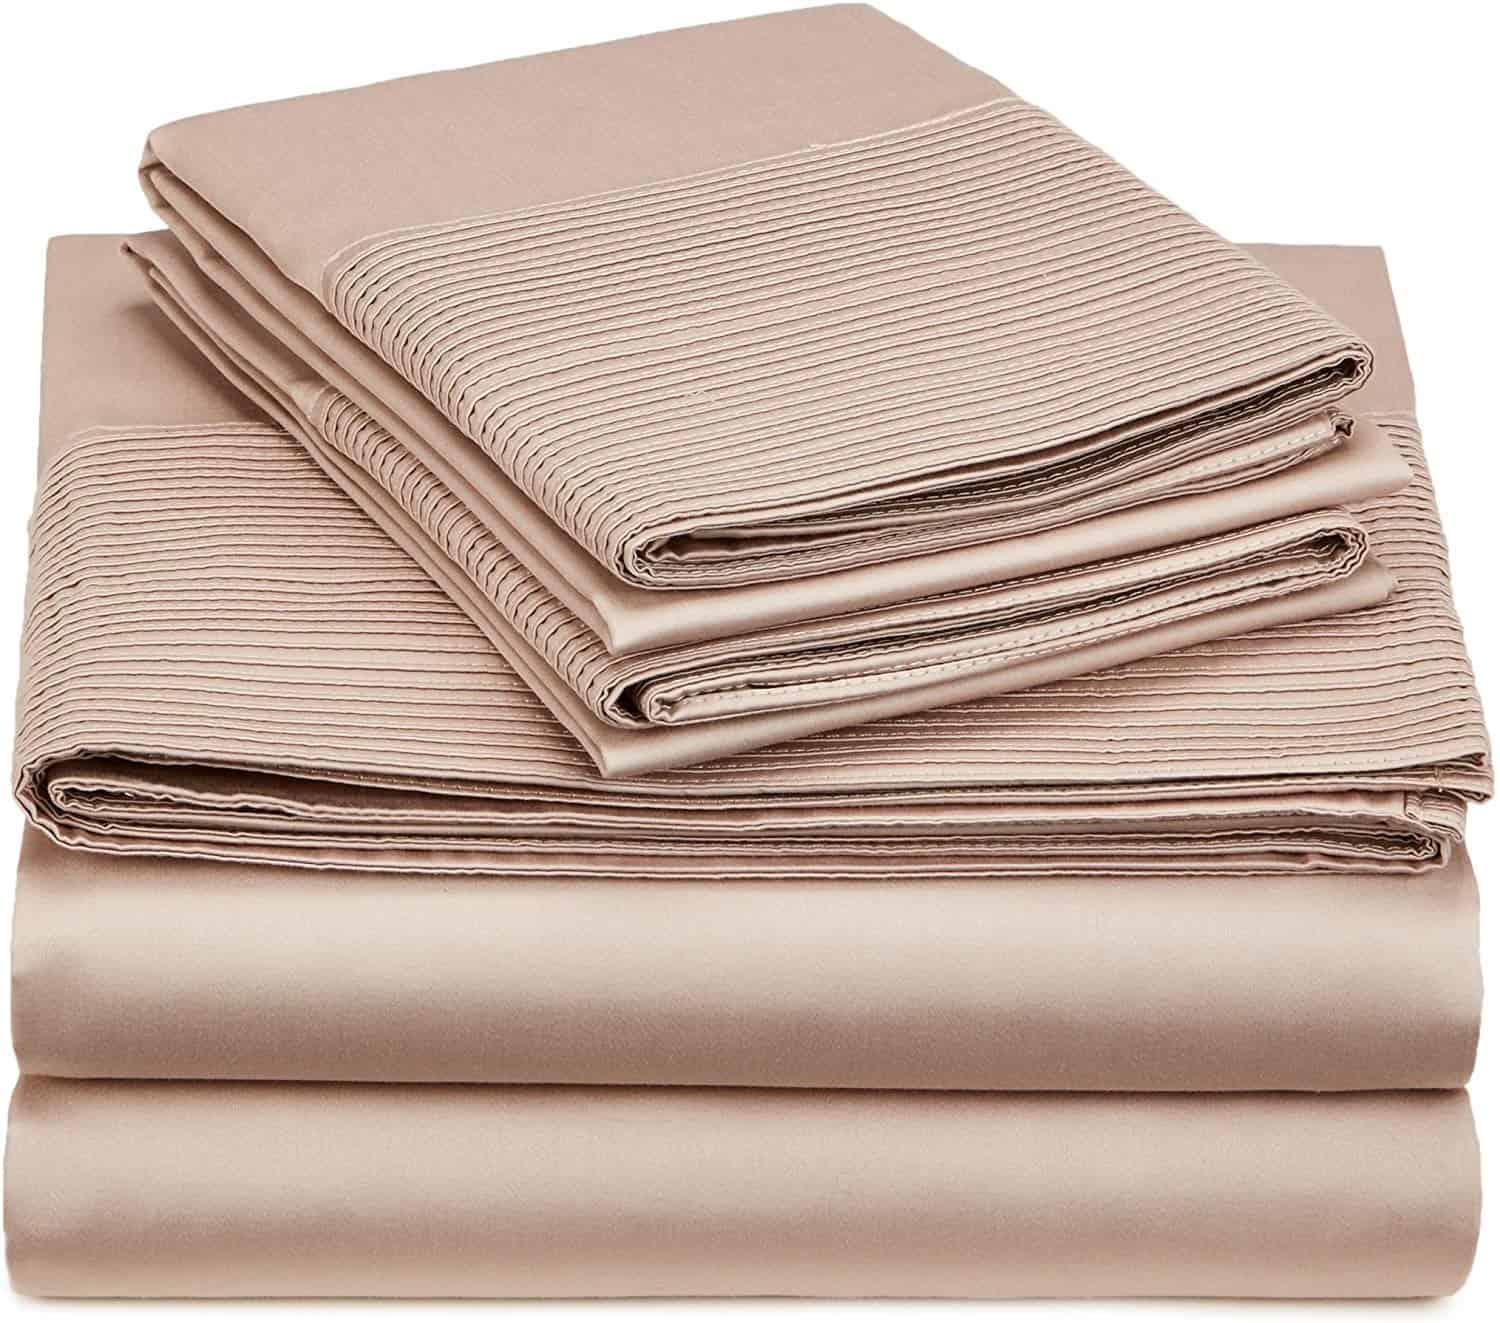 Most affordable sheet